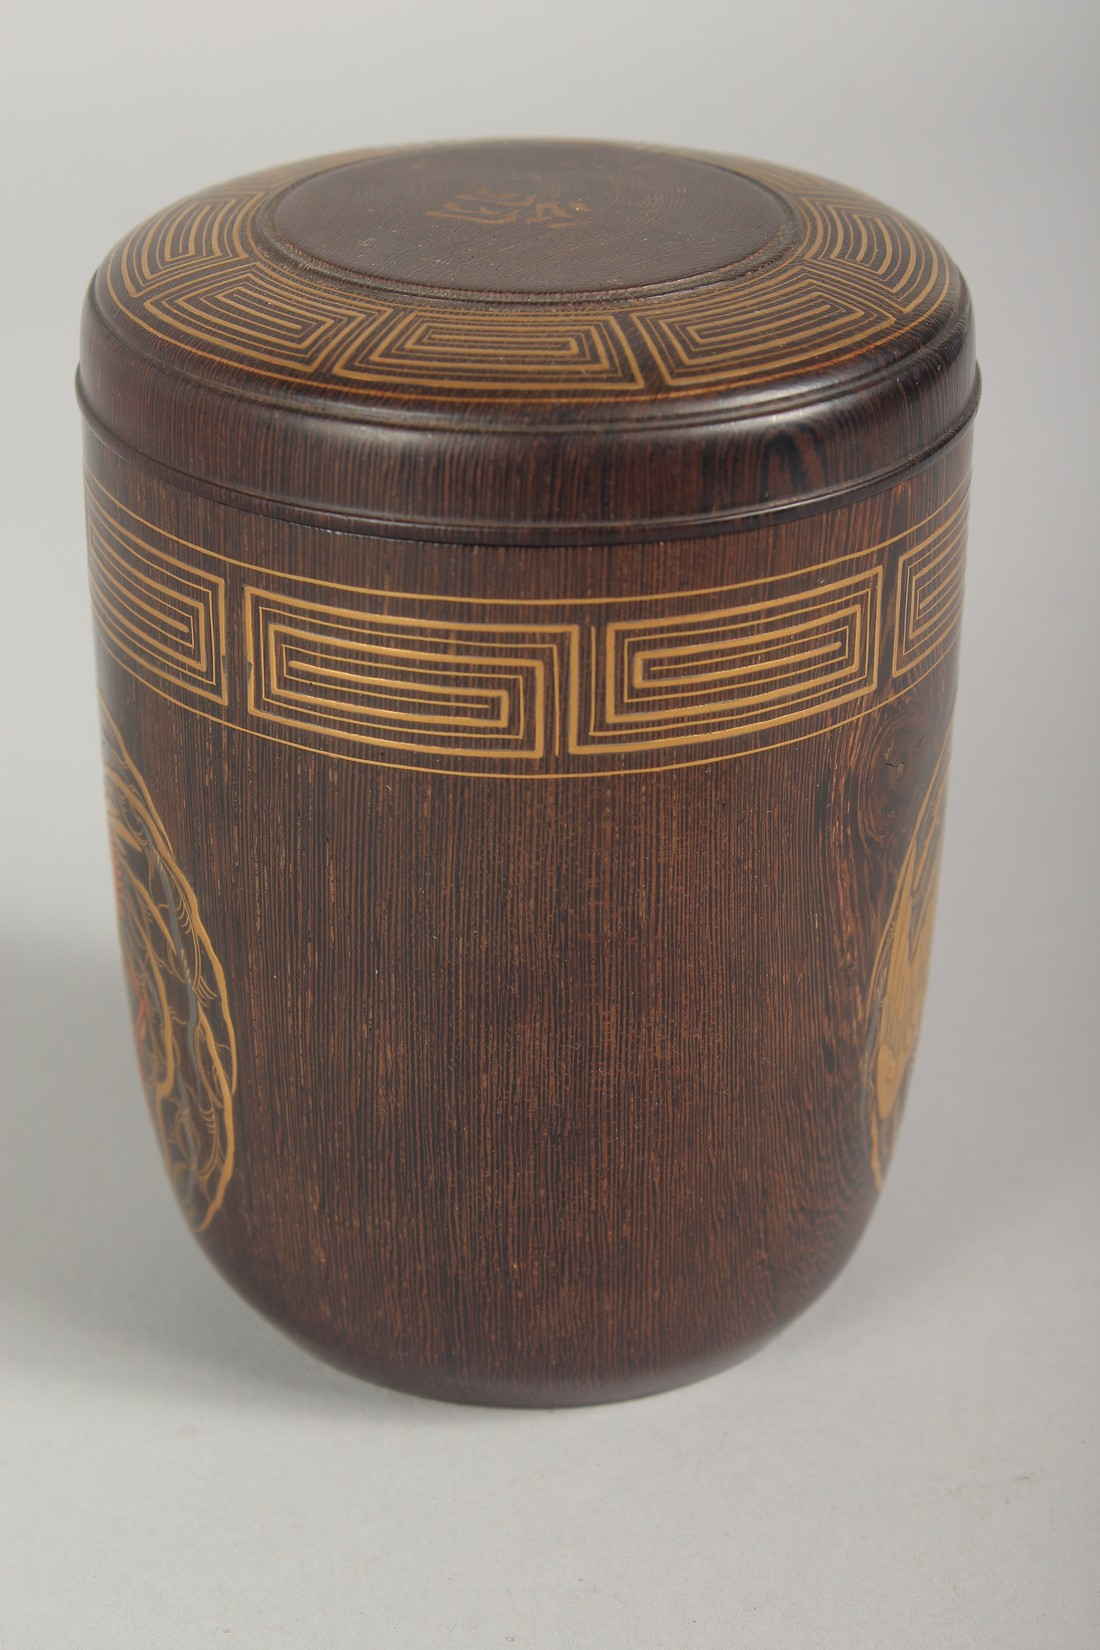 A FINE JAPANESE TURNED WOOD NATSUME / TEA CADDY, with a band of gilded key decoration to the lid and - Image 2 of 9